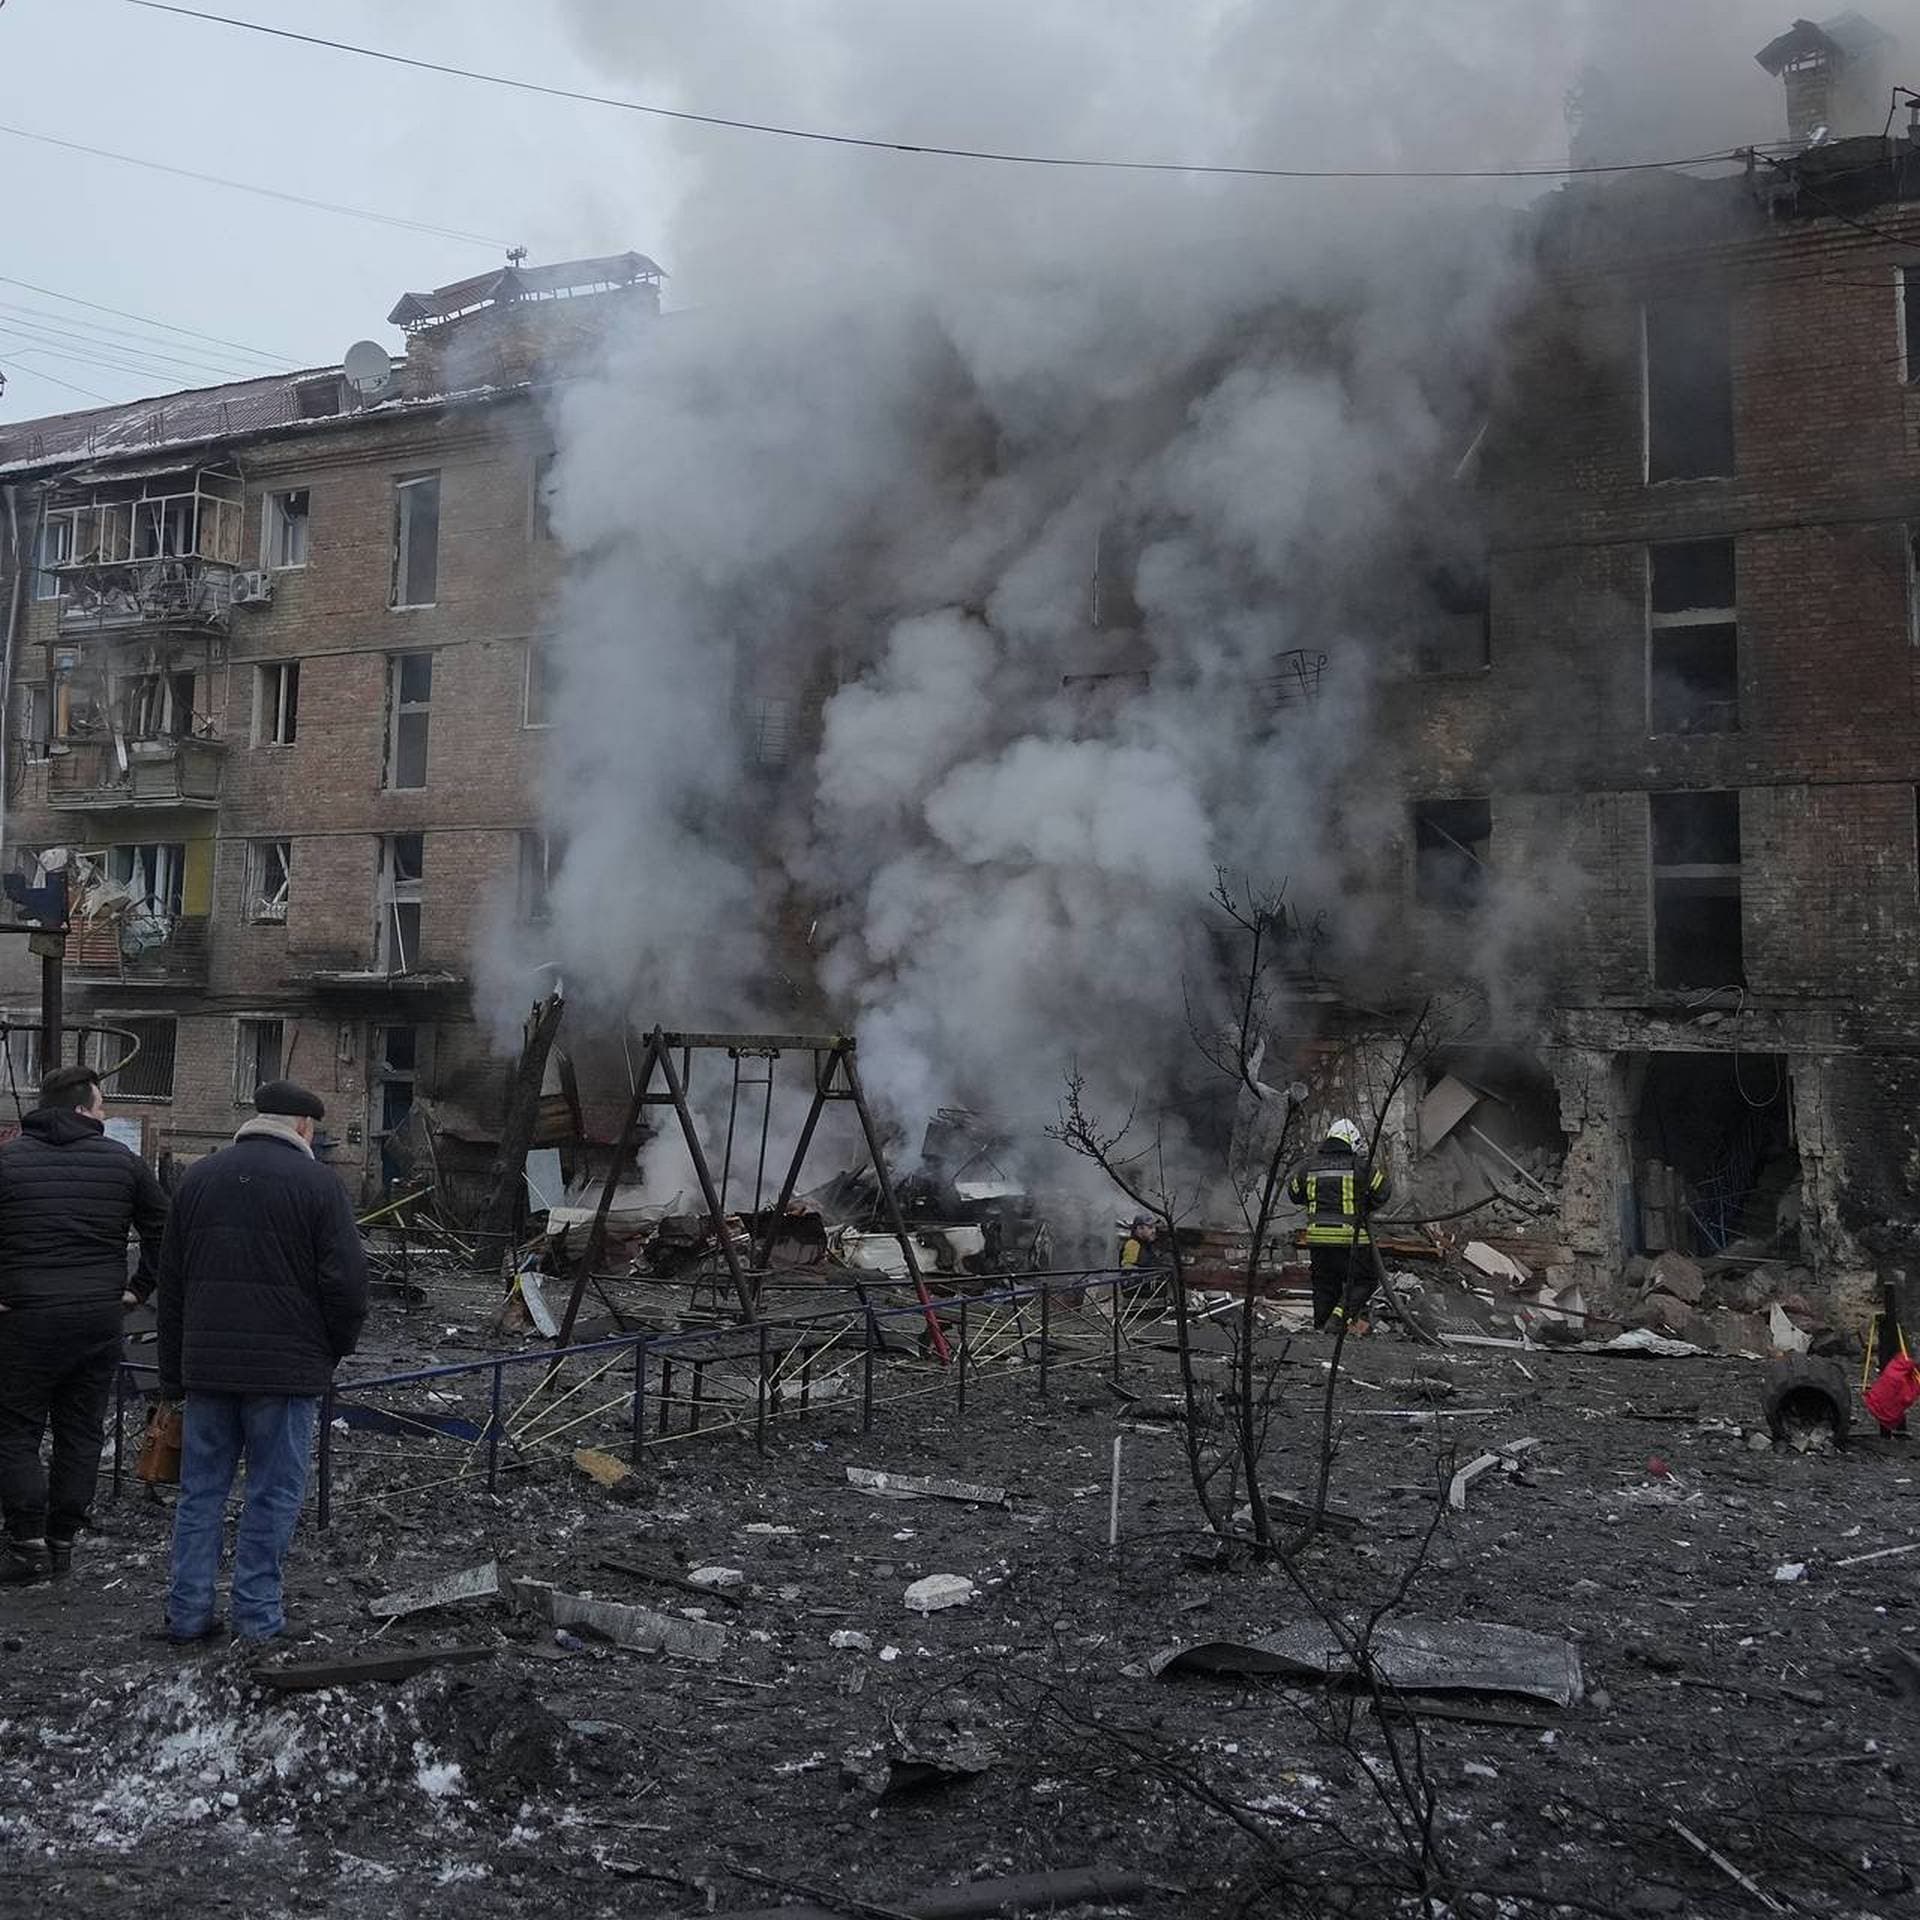 People check a damaged building as emergency personnel work at the scene of a Russian shelling in the town of Vyshgorod